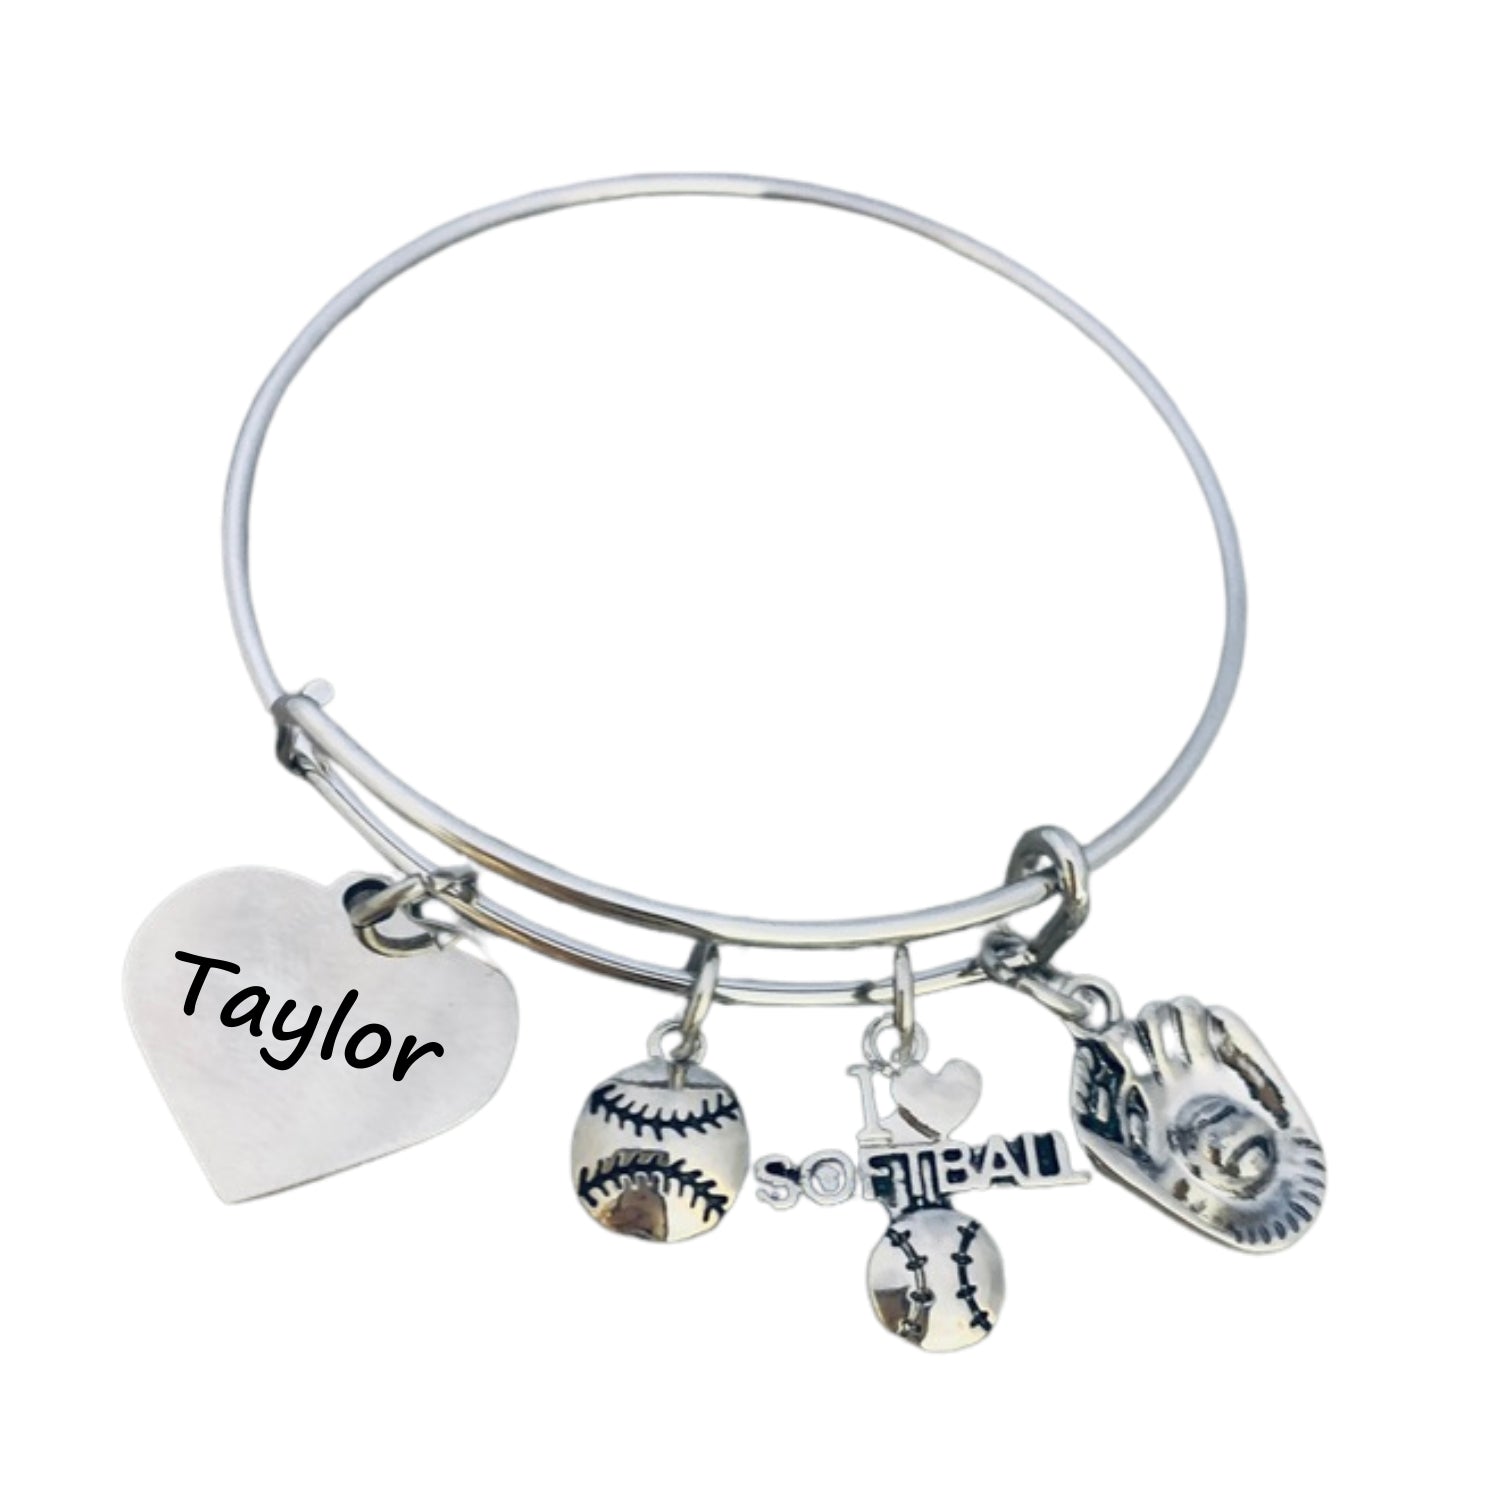 Girls Personalized Silver Plated Adjustable Softball Bracelet with Engraved Charm